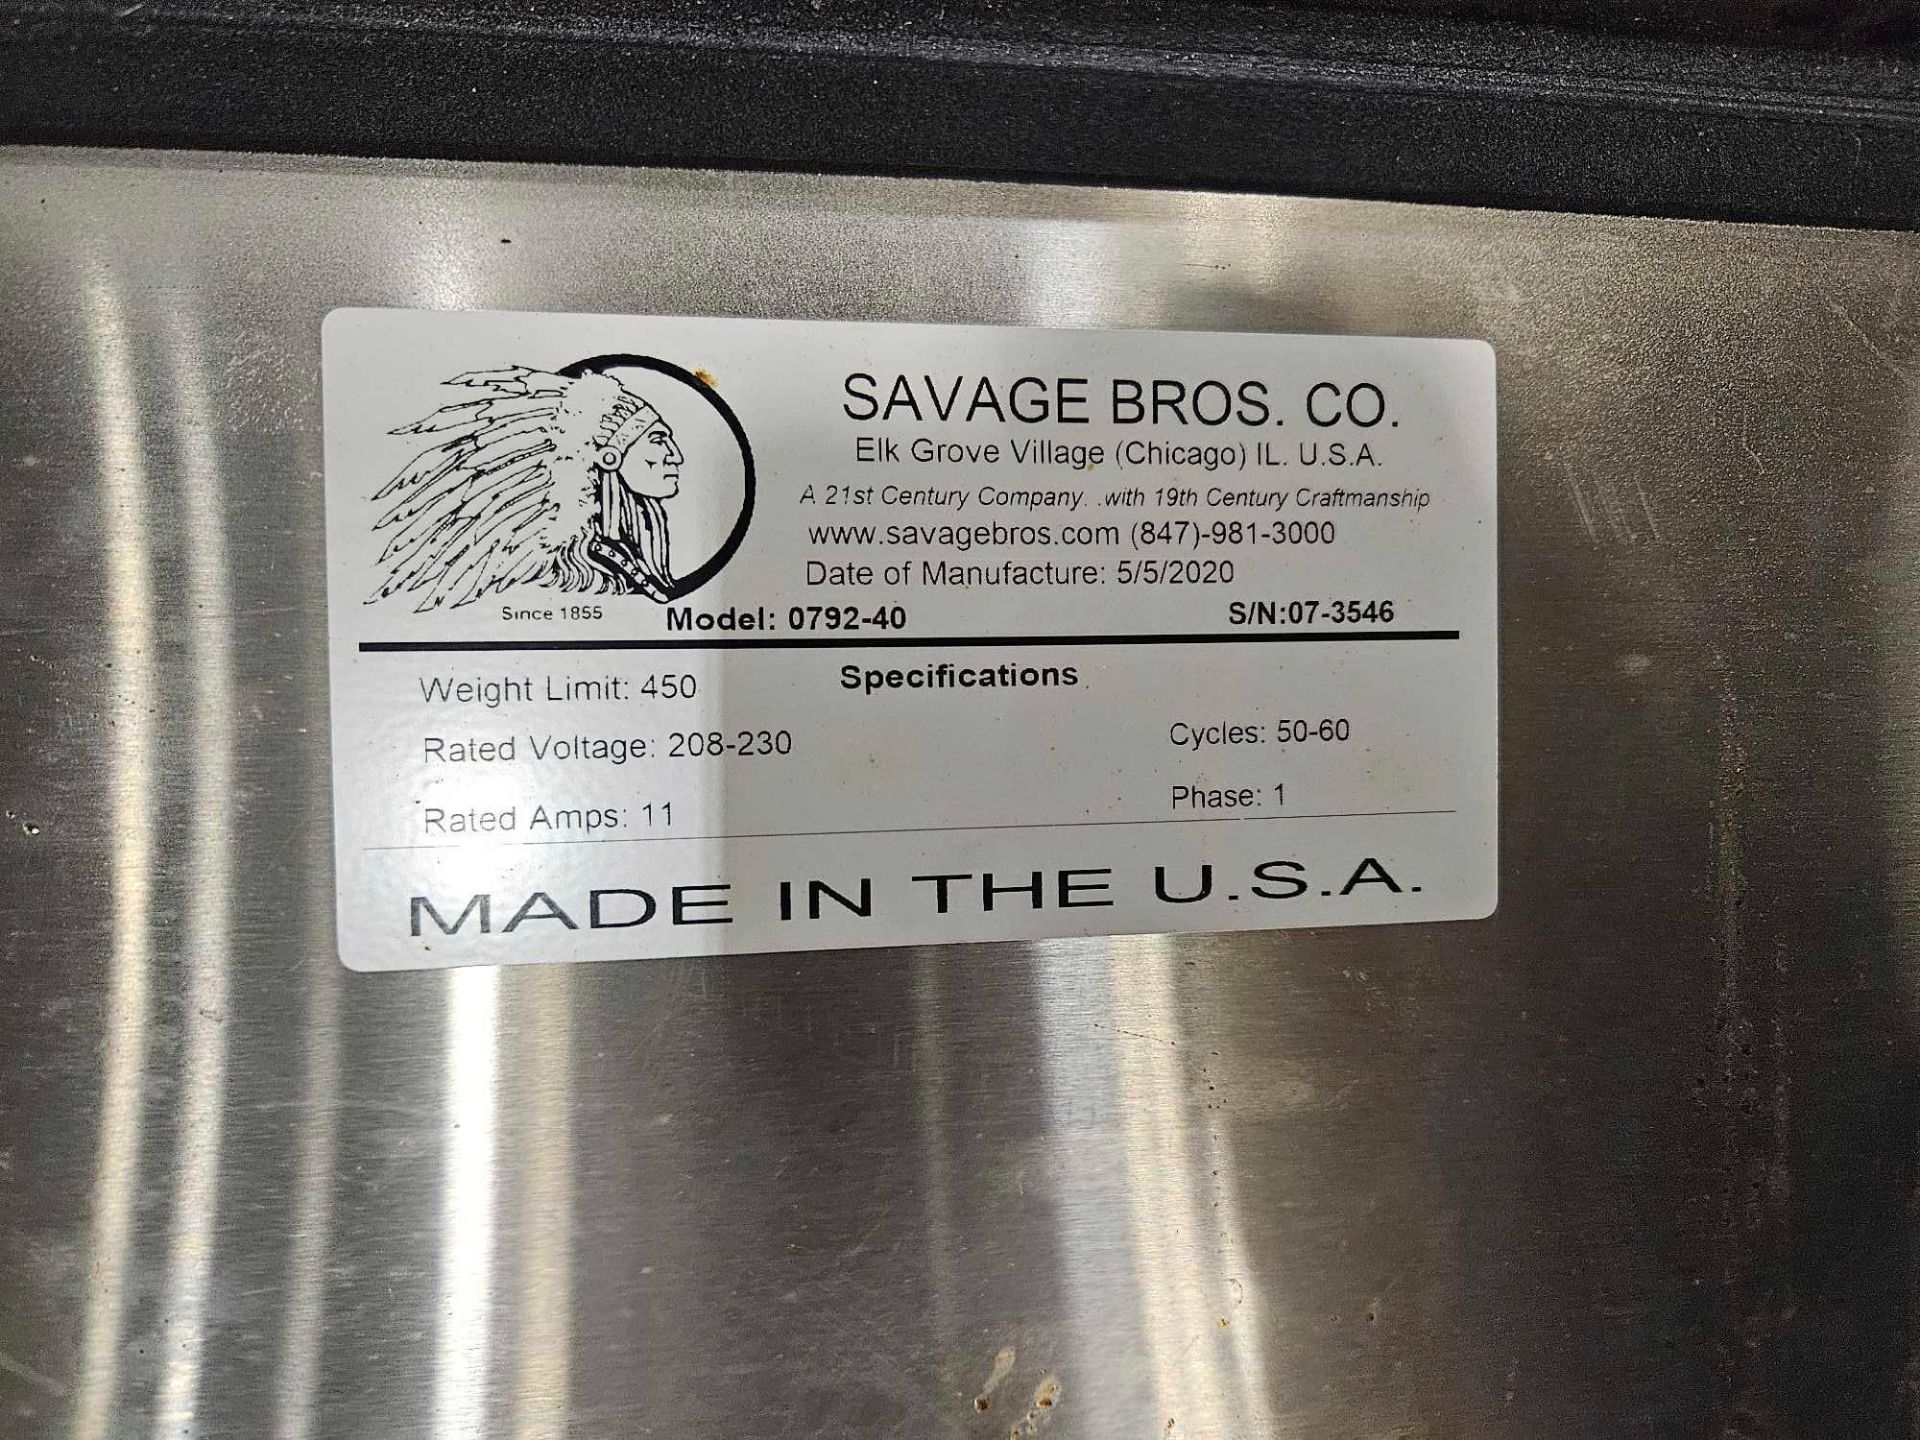 Savage Bros. Co. 450 Lb Kettle Lift - Image 11 of 16